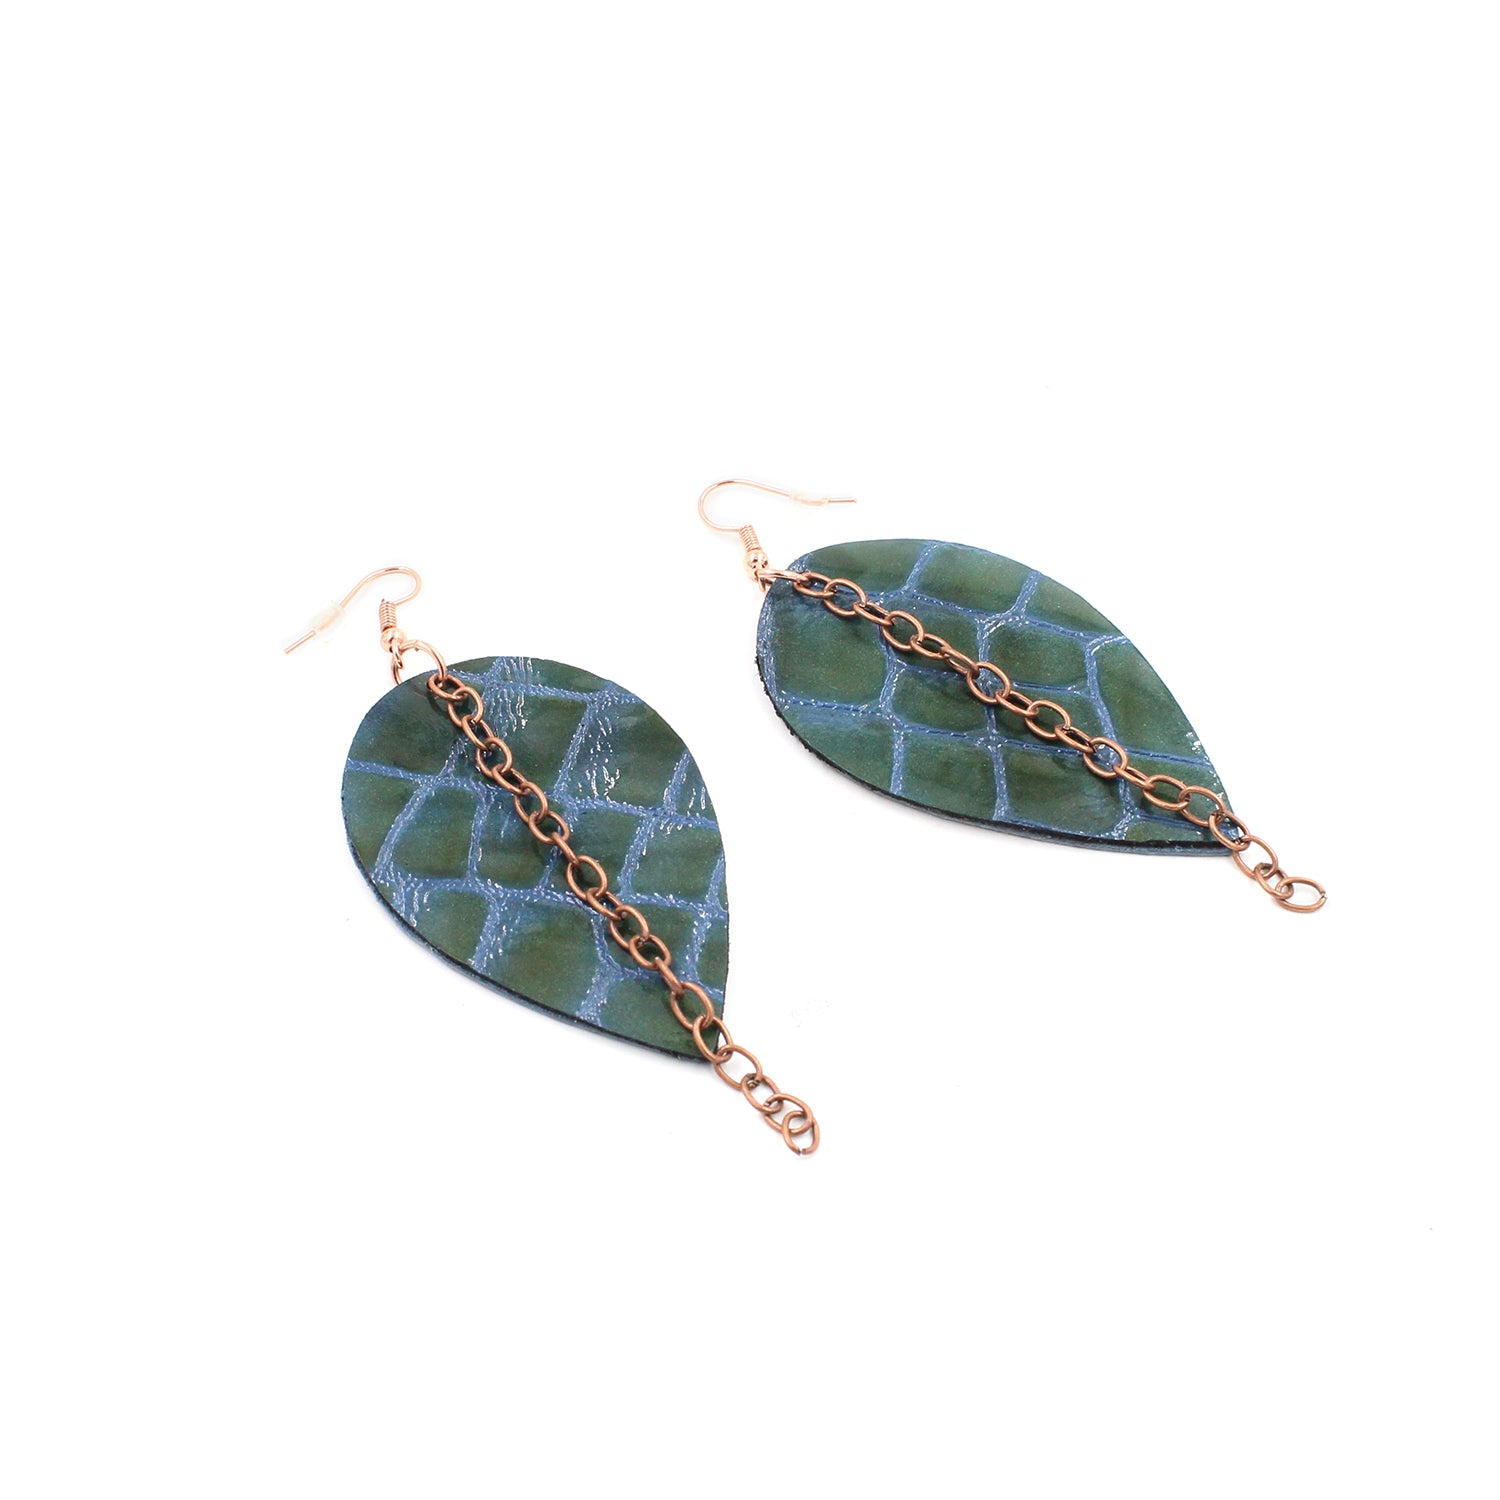 Crocodile Patent Leather Reverse Drop Earrings with Copper Chain